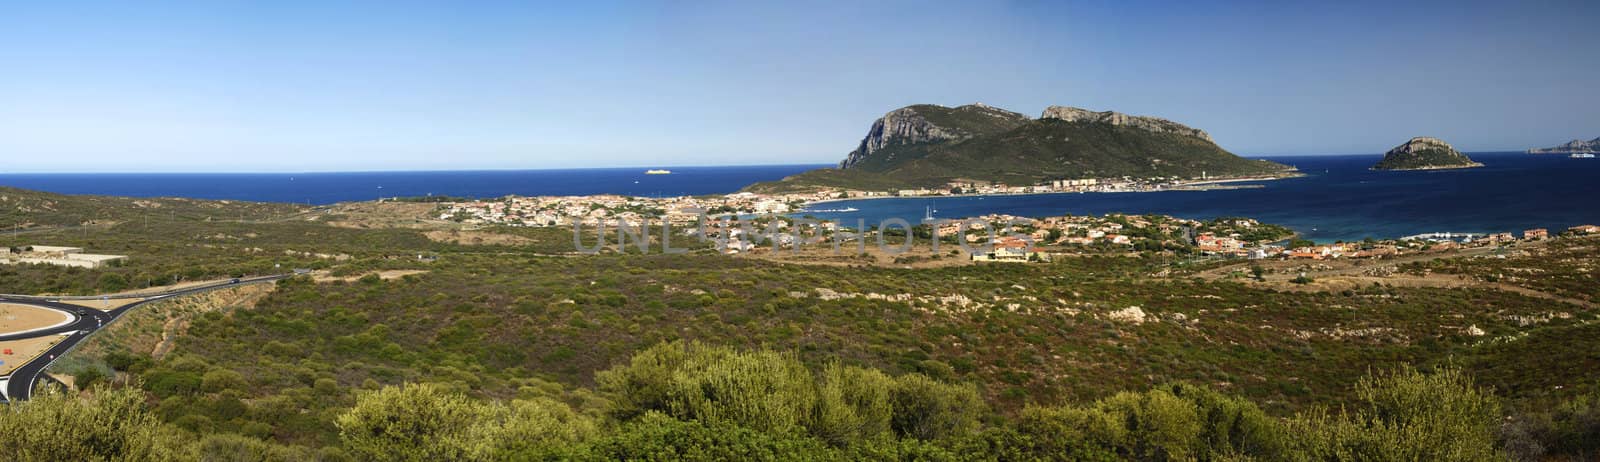 View at beautiful Sardinian landscape with island and a town. Panorama